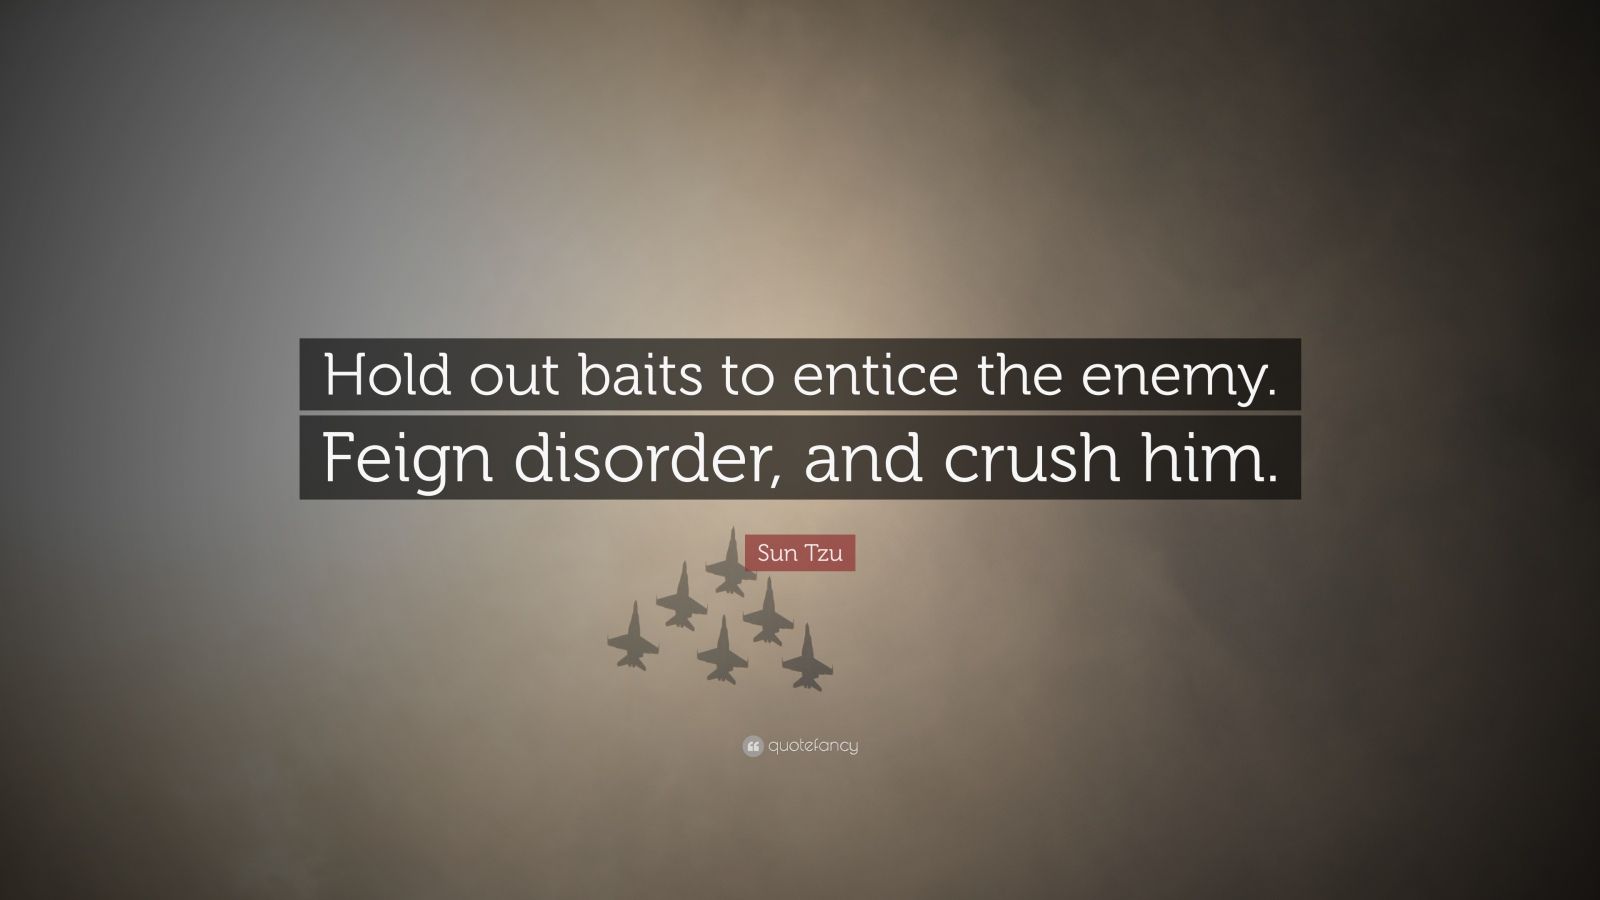 sun tzu quote: "hold out baits to entice the enemy.